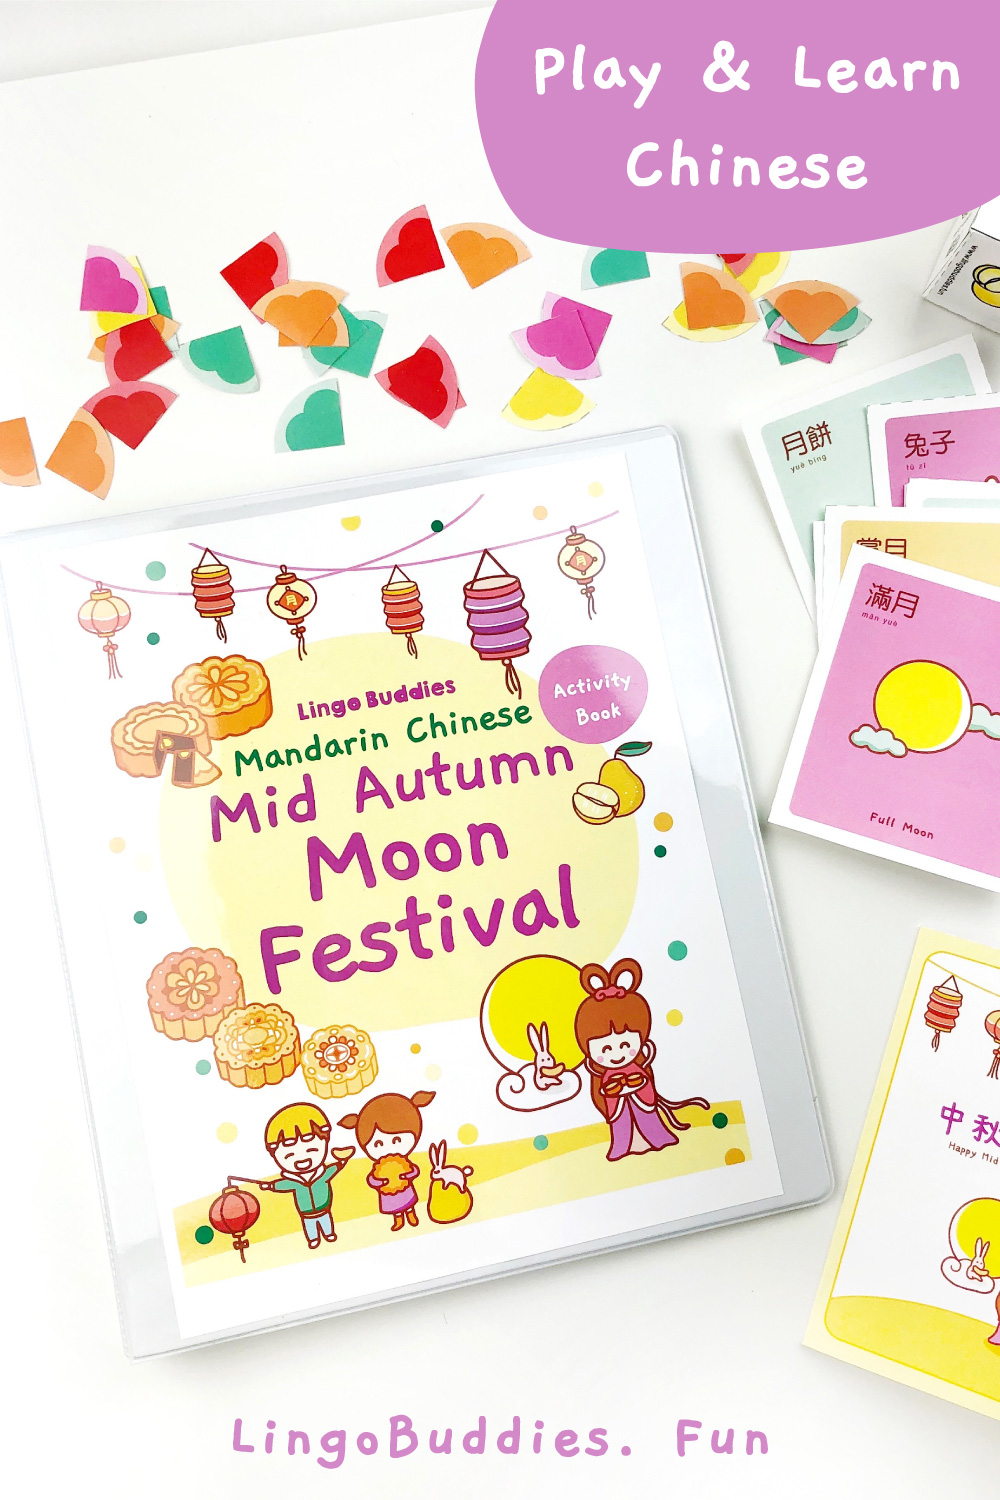 Mid-Autumn Festival: Story & Craft, Events